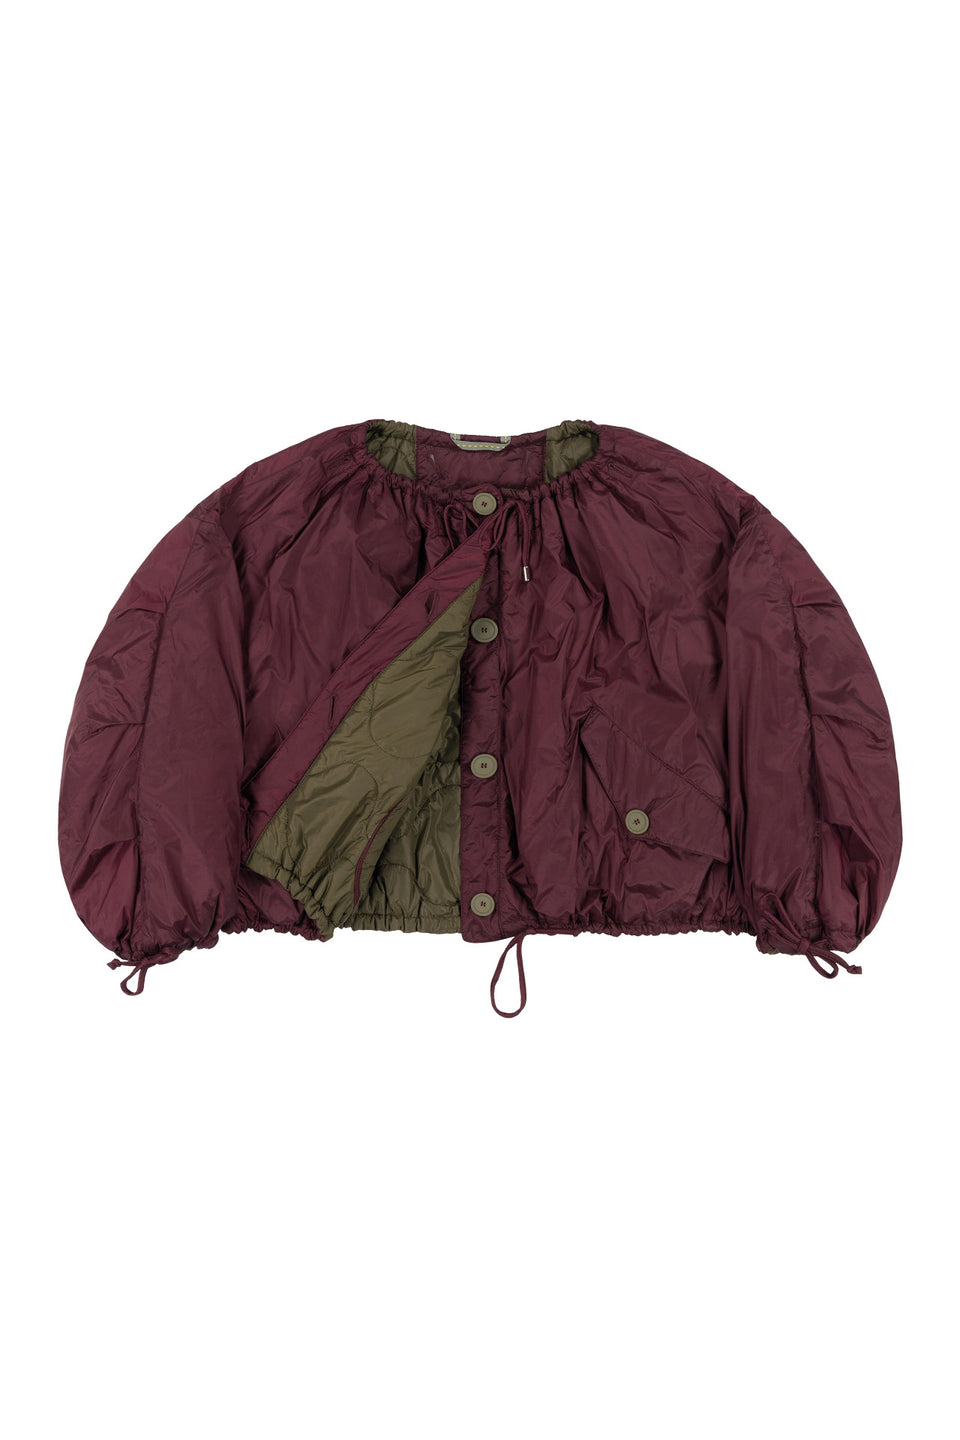 Parachute Quilt Bomber - Wine / Dark Olive (listing page thumbnail)